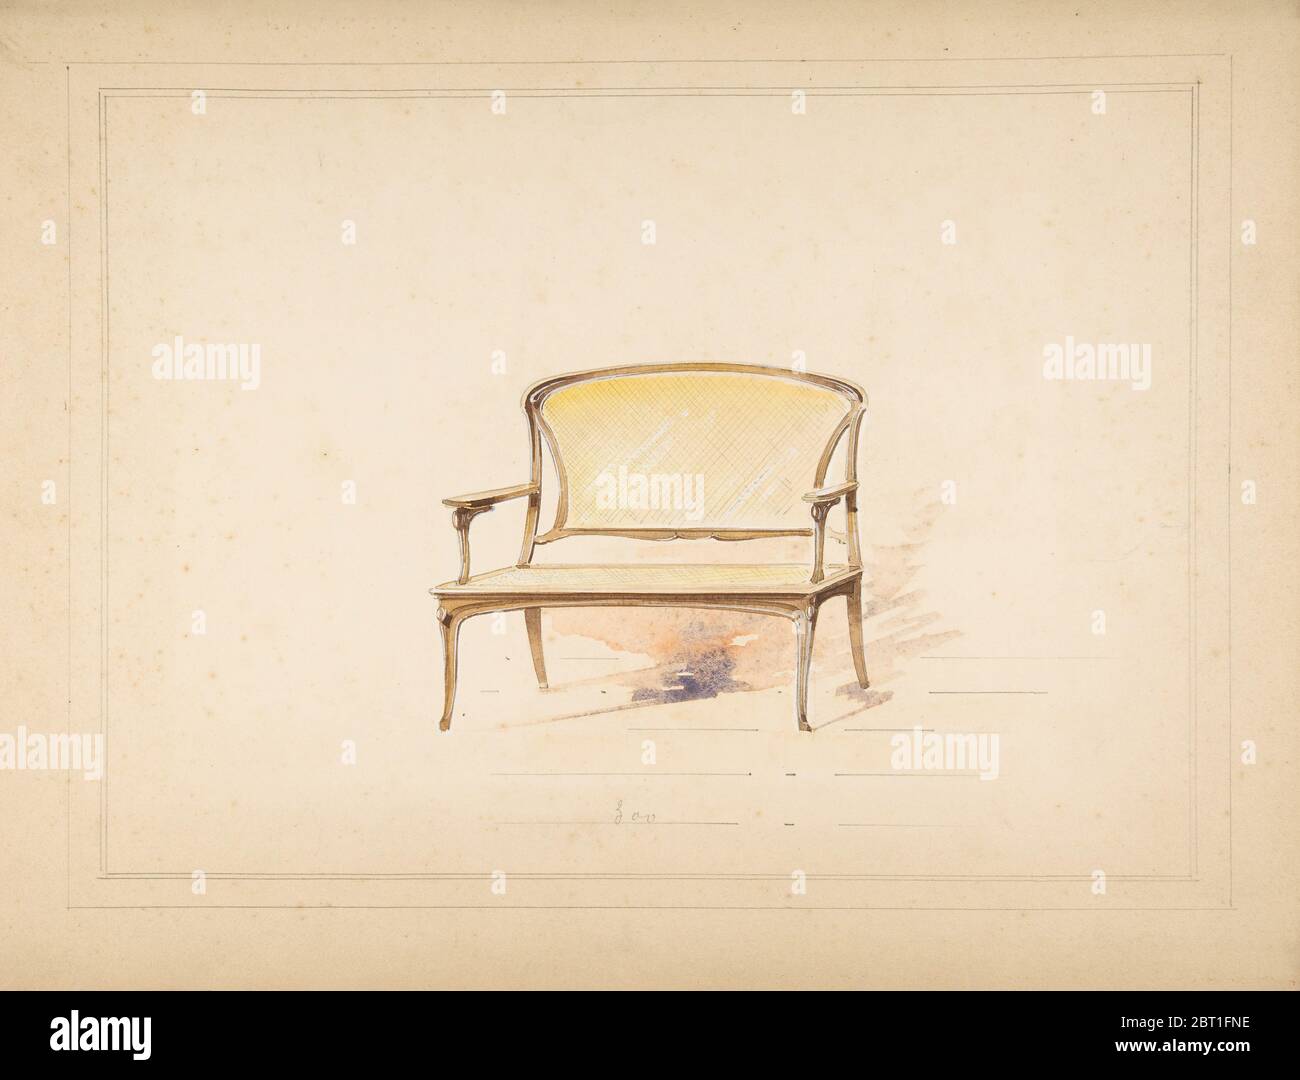 Design for Art Nouveau Loveseat with Caning, 19th century. Stock Photo